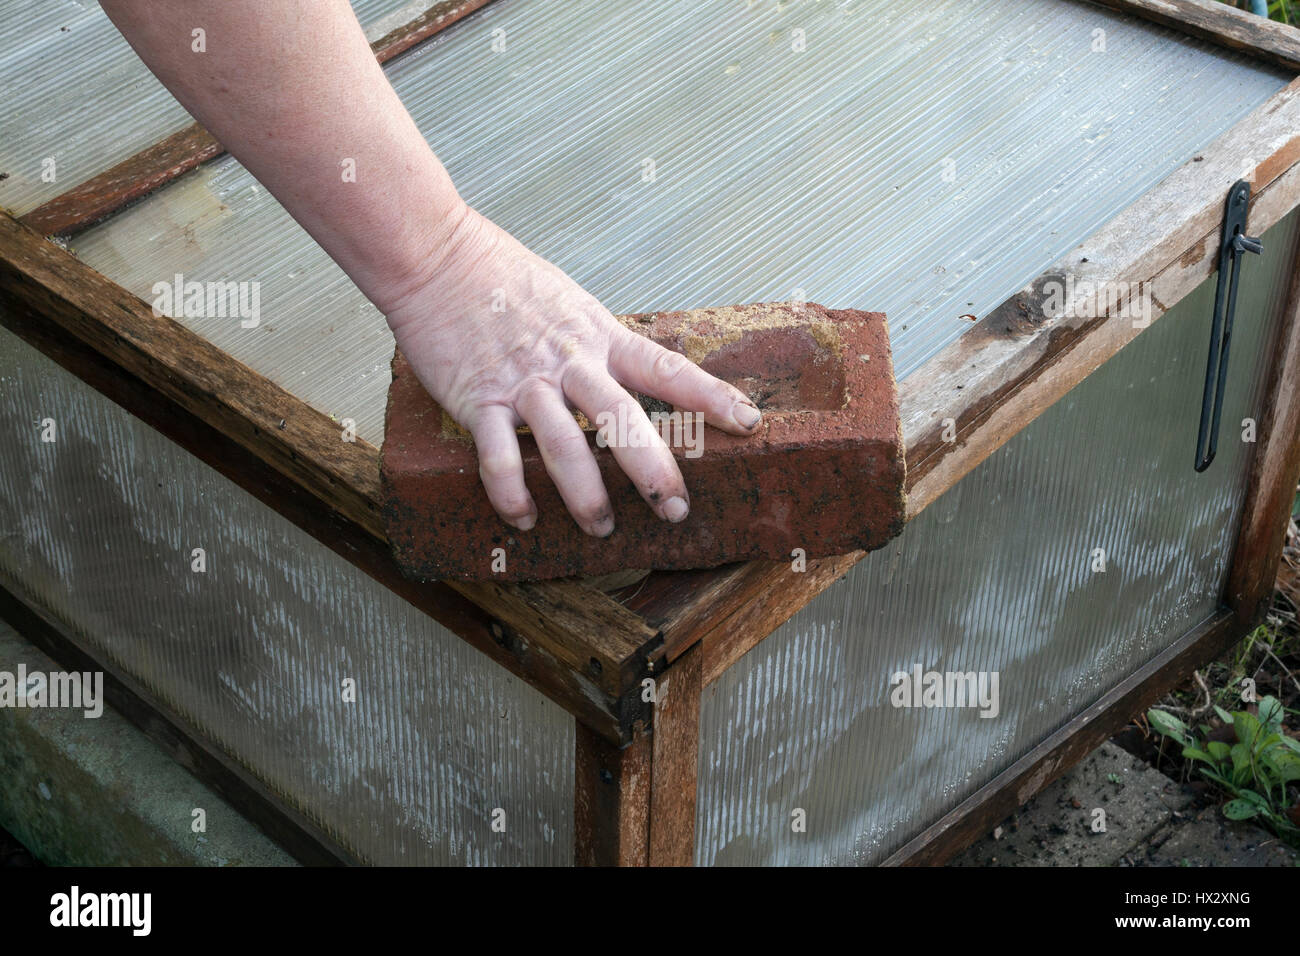 Step by step - Protecting an alpine sink from winter weather Step # 3 Weigh cold frame down using house bricks Stock Photo